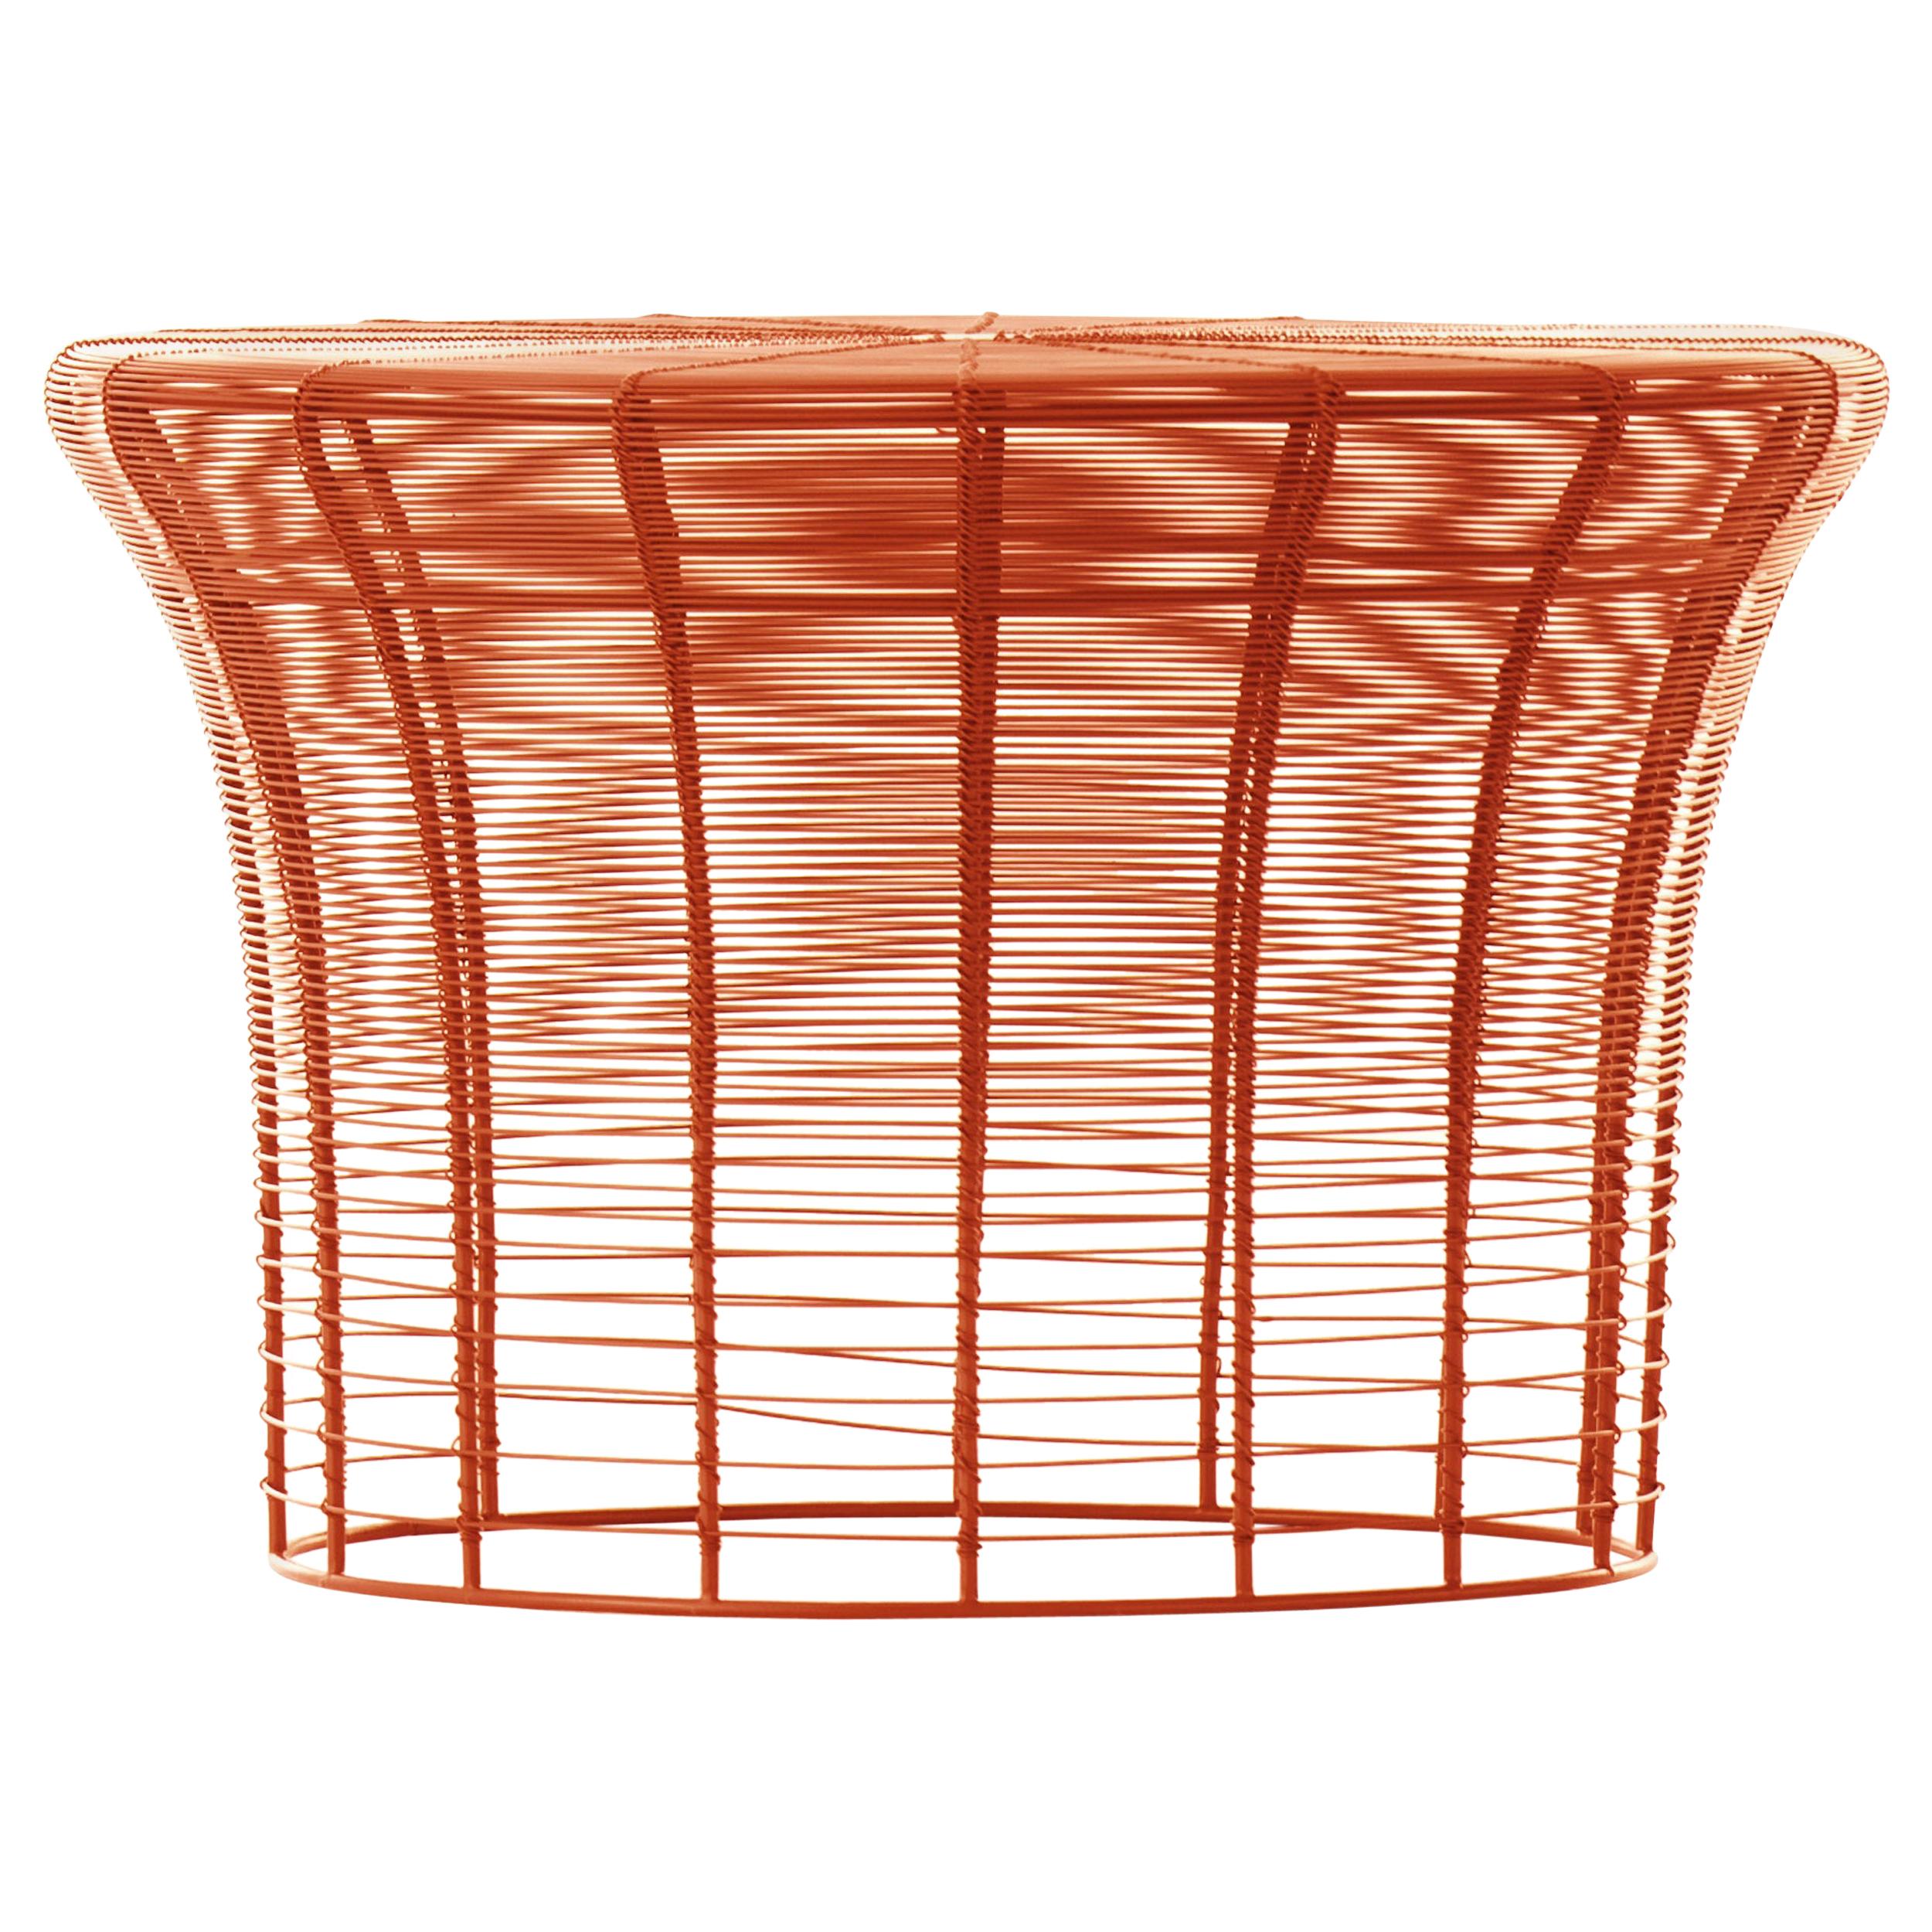 GAN Aram High Table in Red and Orange by Nendo